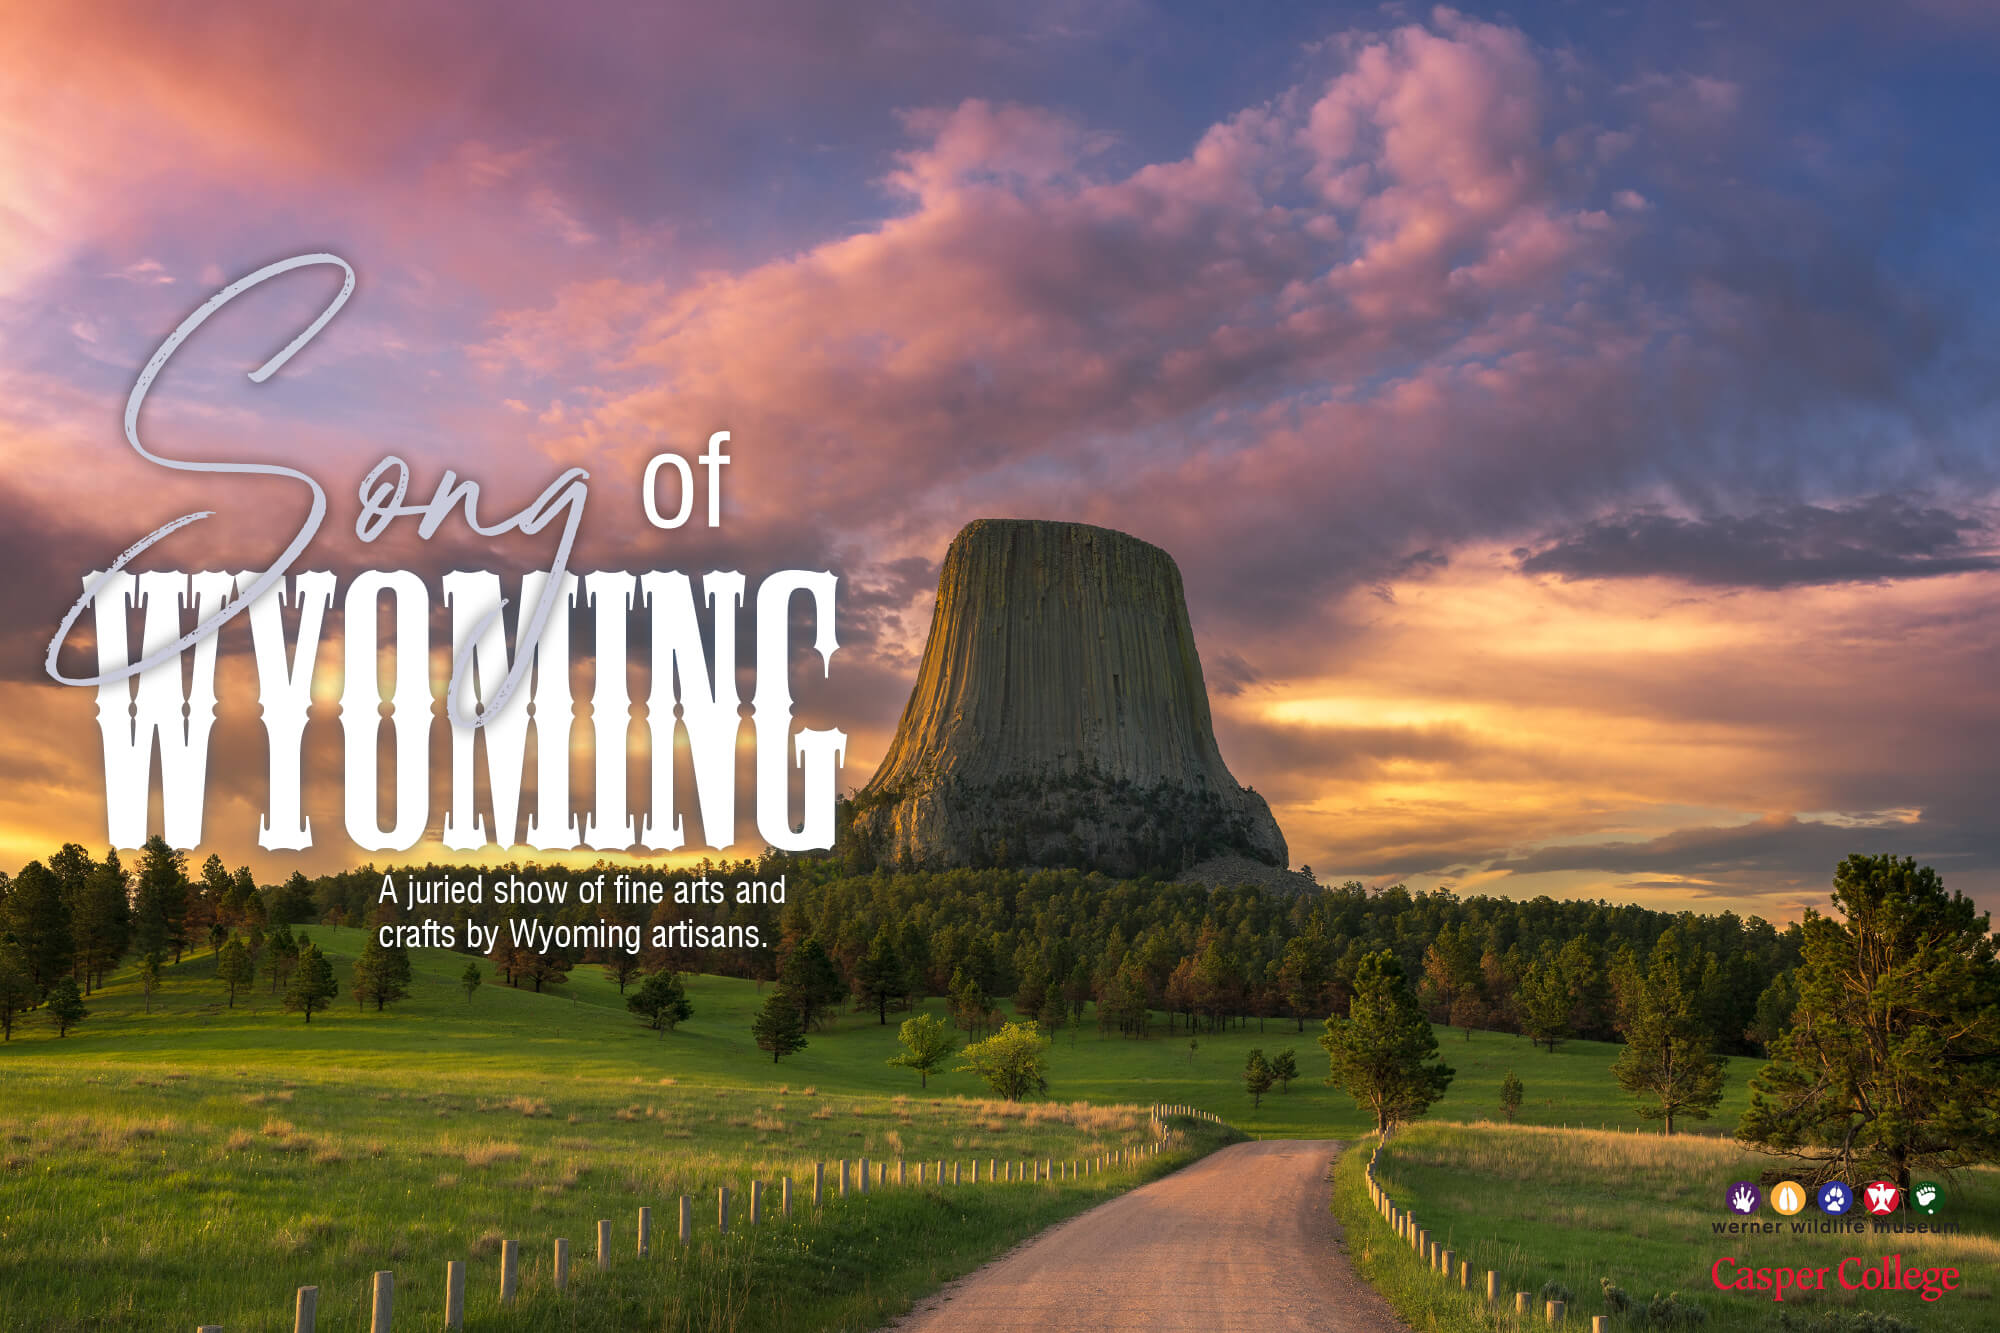 Image for "Song of Wyoming" press release.